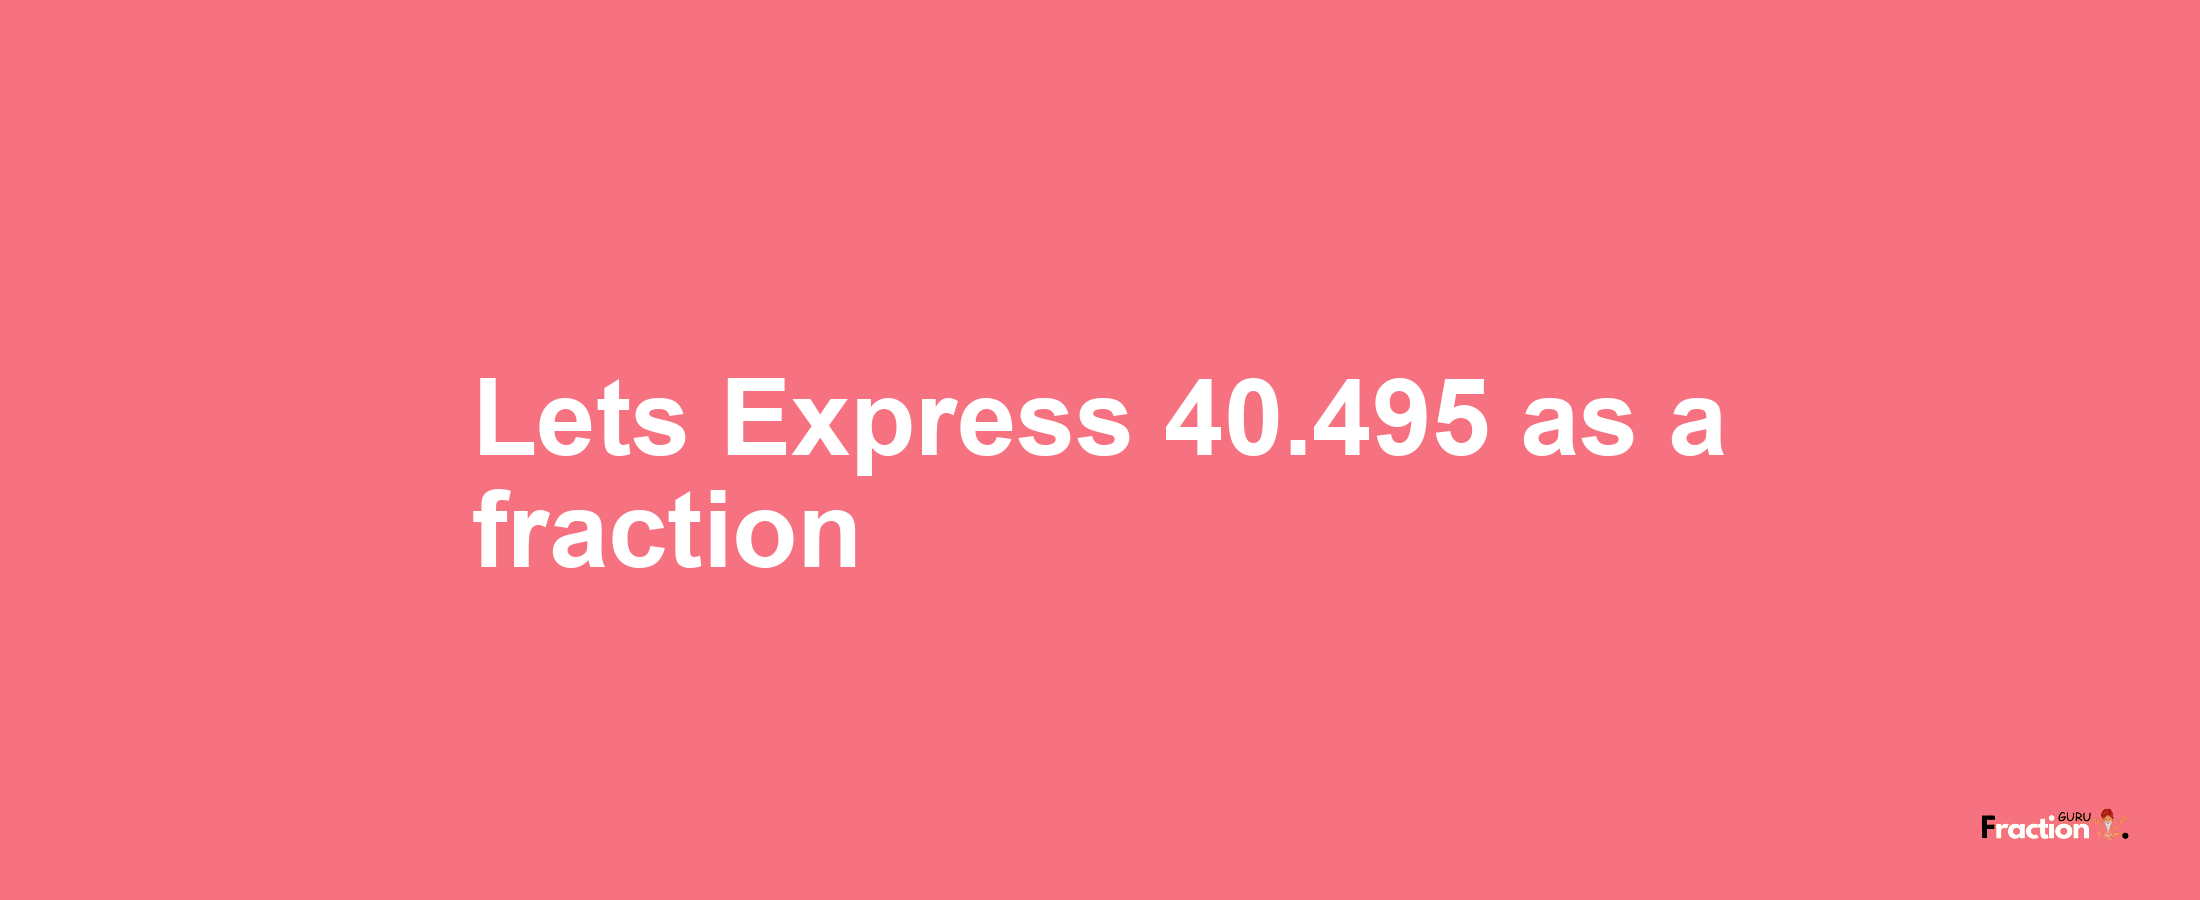 Lets Express 40.495 as afraction